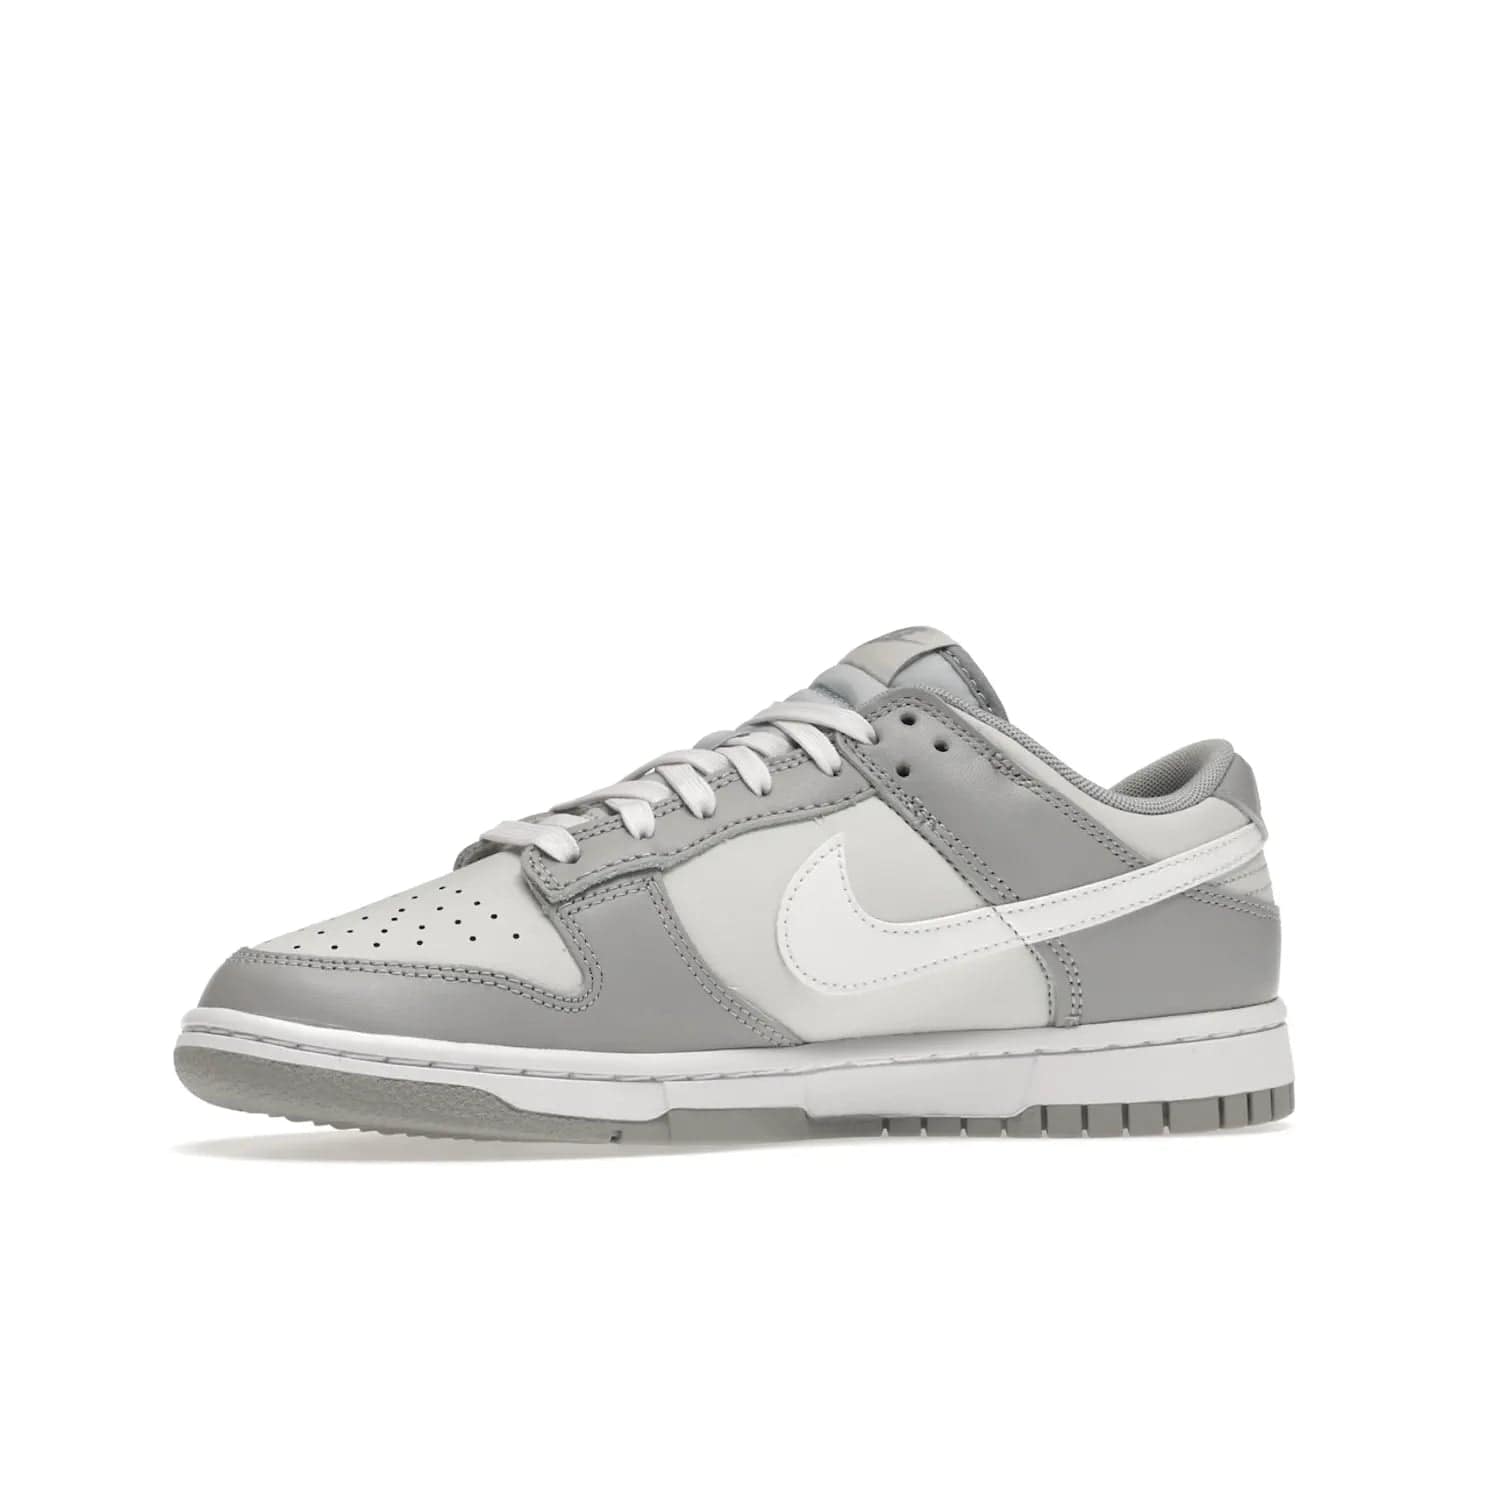 Nike Dunk Low Two Tone Grey - Image 17 - Only at www.BallersClubKickz.com - Fresh Nike Dunk Low Two Tone Grey leather/overlay Sneaker. White Swoosh detailing, nylon tongue, woven label and Air Sole. Get yours and stay on the trend.